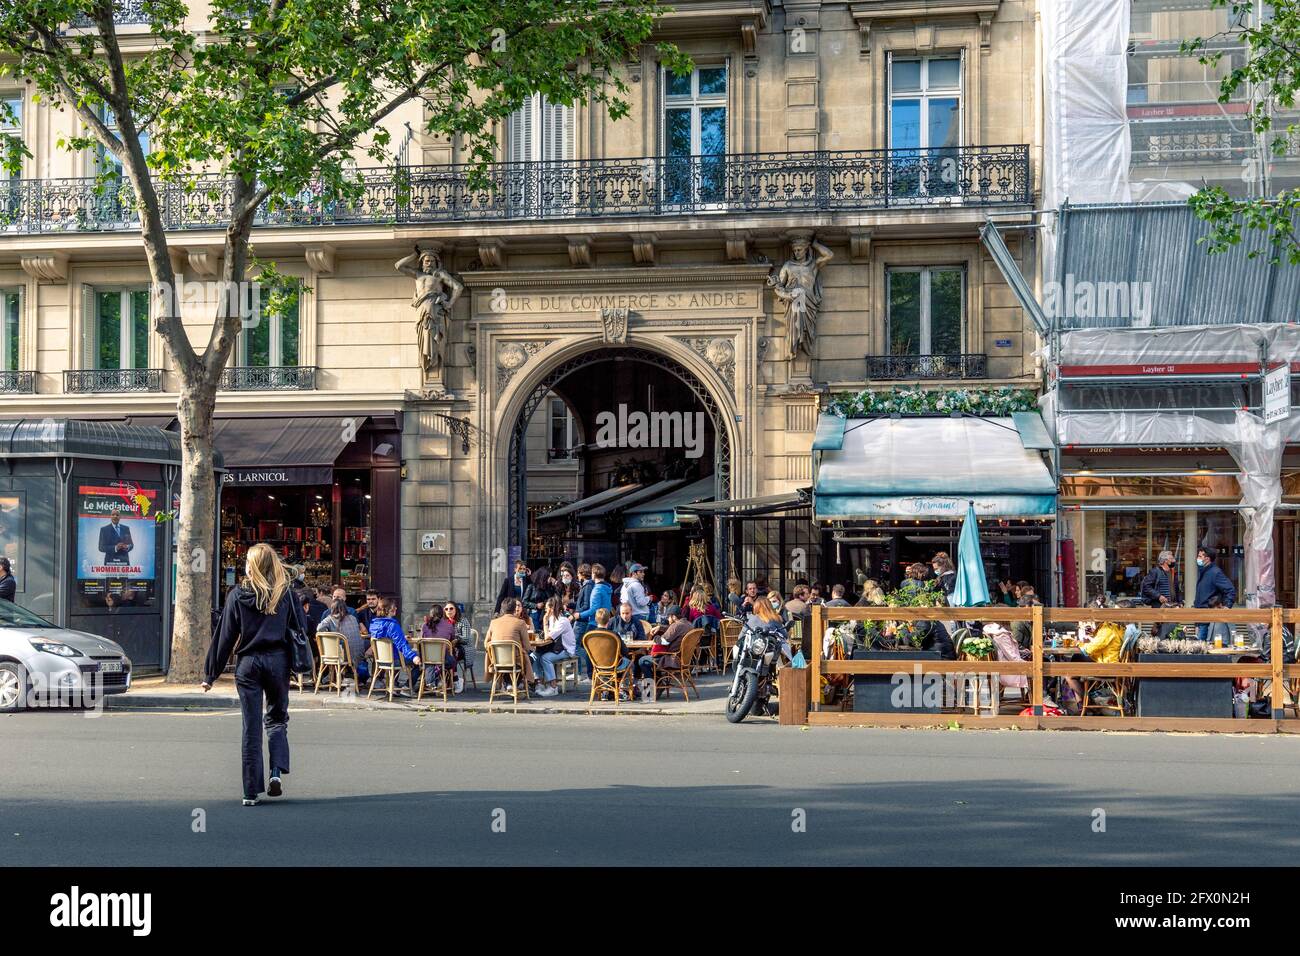 Paris, France - May 19, 2021: Day after lockdown due to covid-19 in a famous Parisian cafe in Paris Stock Photo